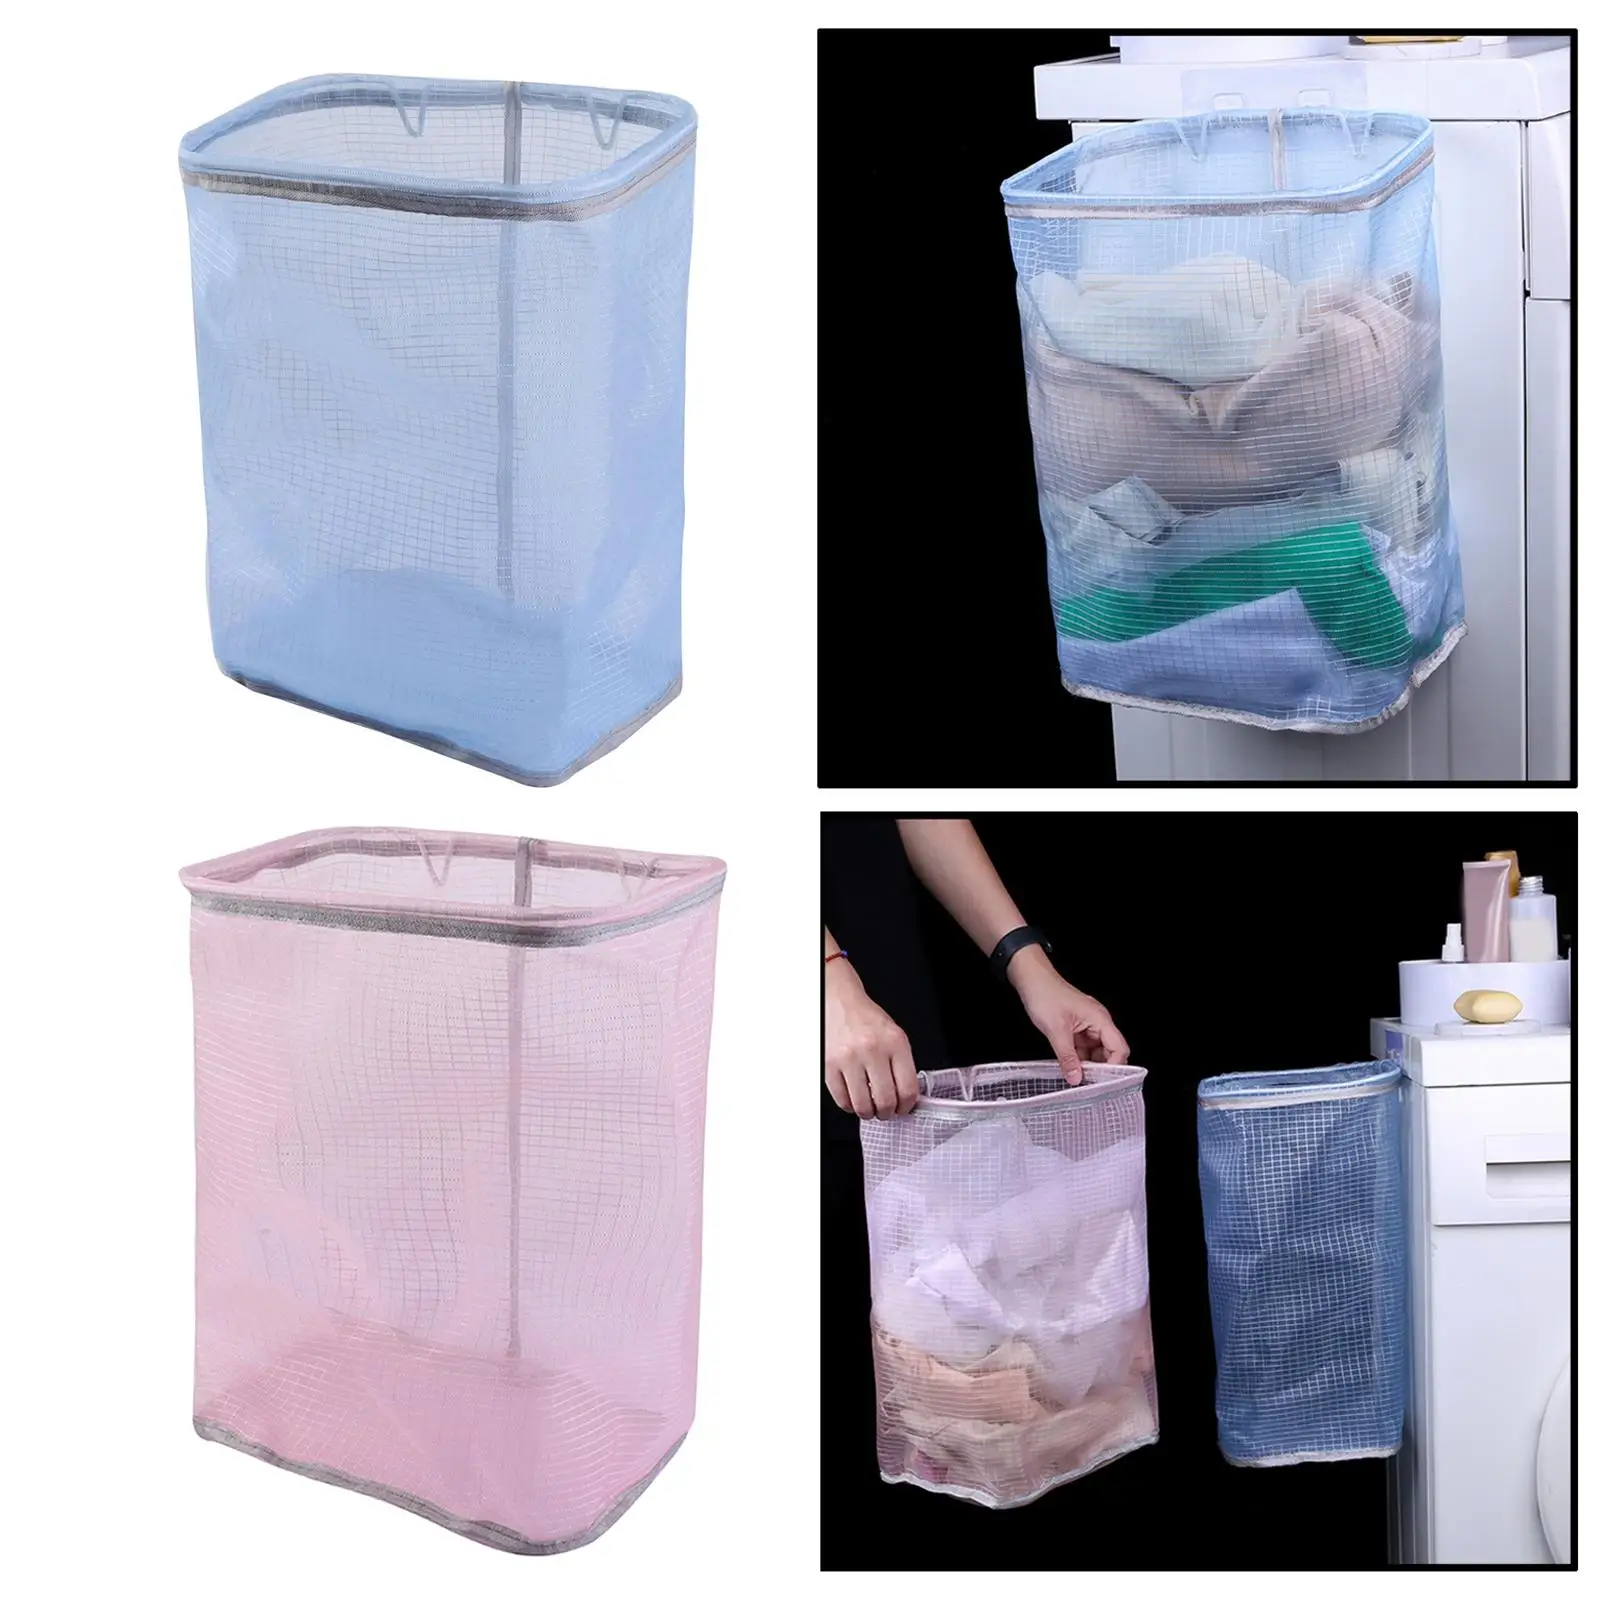 Laundry Hamper Wall Hanging Dirty Clothes Storage Large Sized for Dormitory